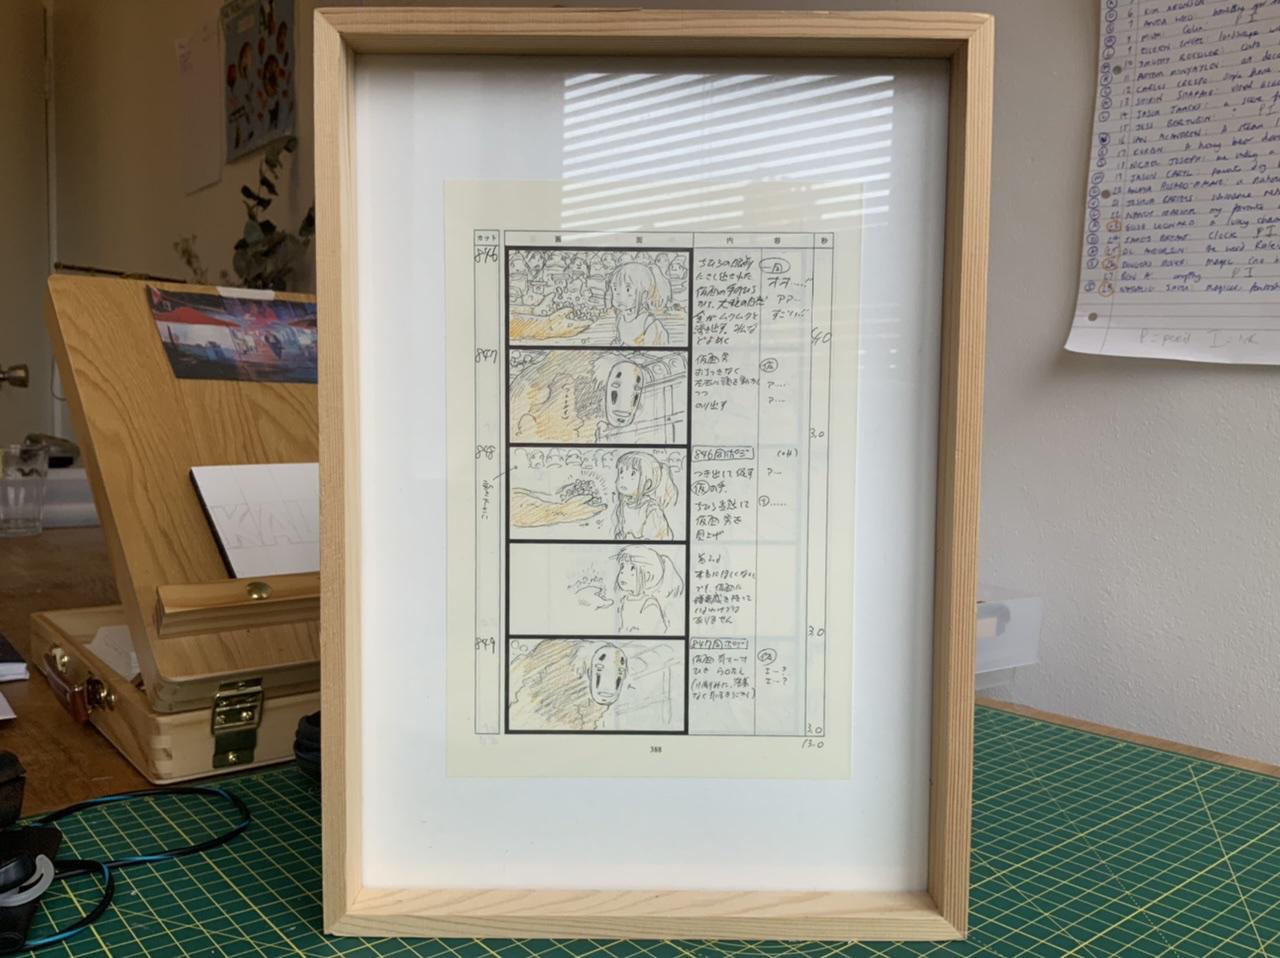 A picture frame with storyboards from Spirited Away by Miyazaki